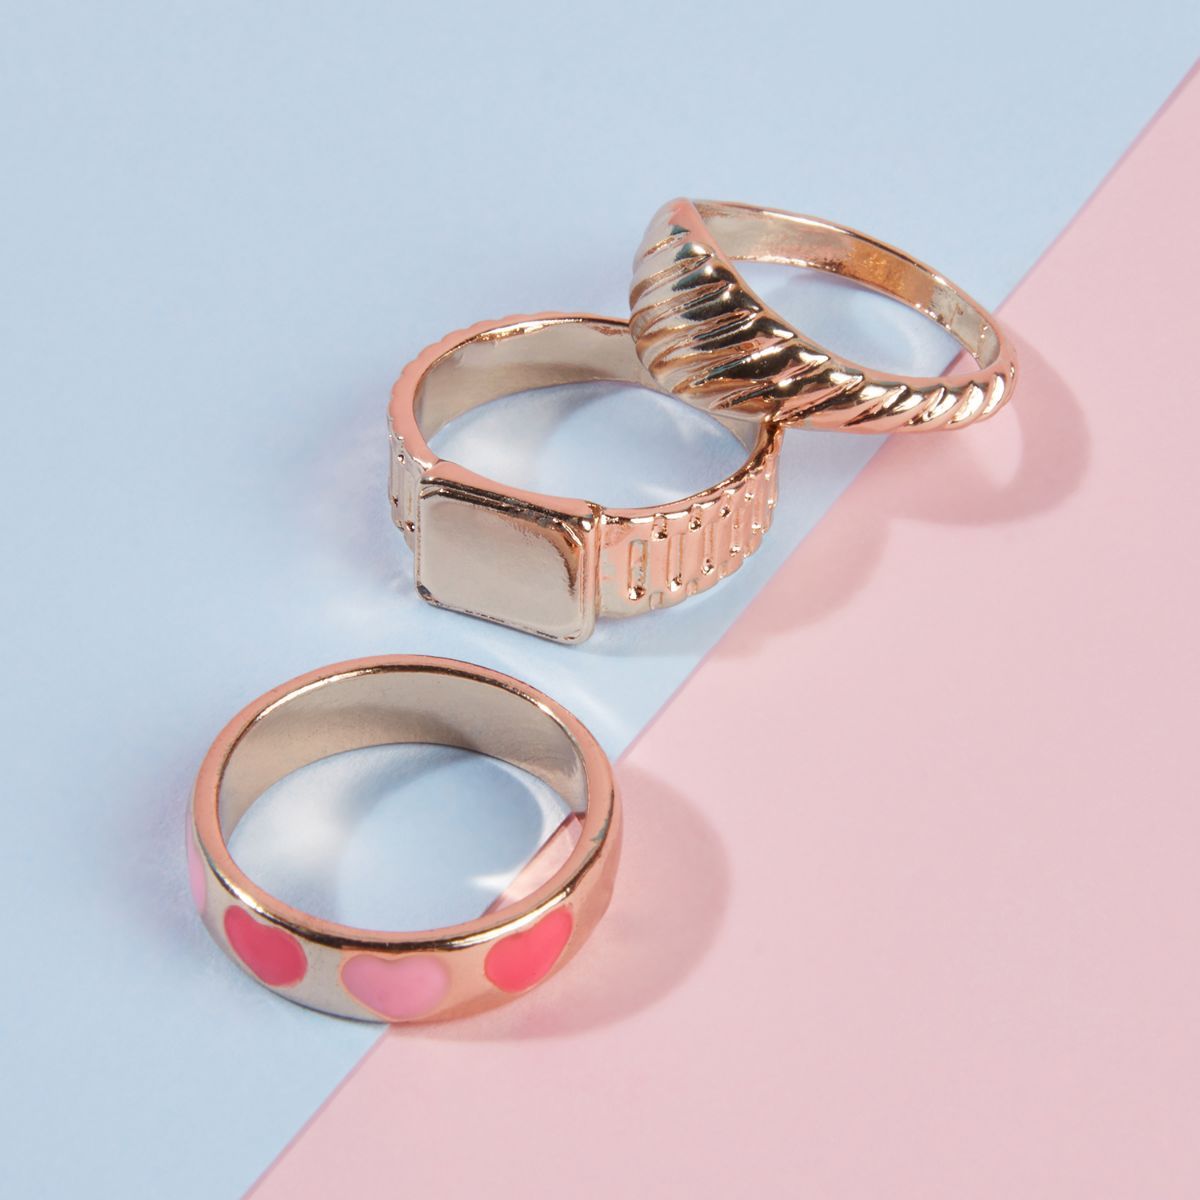 Buy Multi-Toned Rings for Women by Youbella Online | Ajio.com